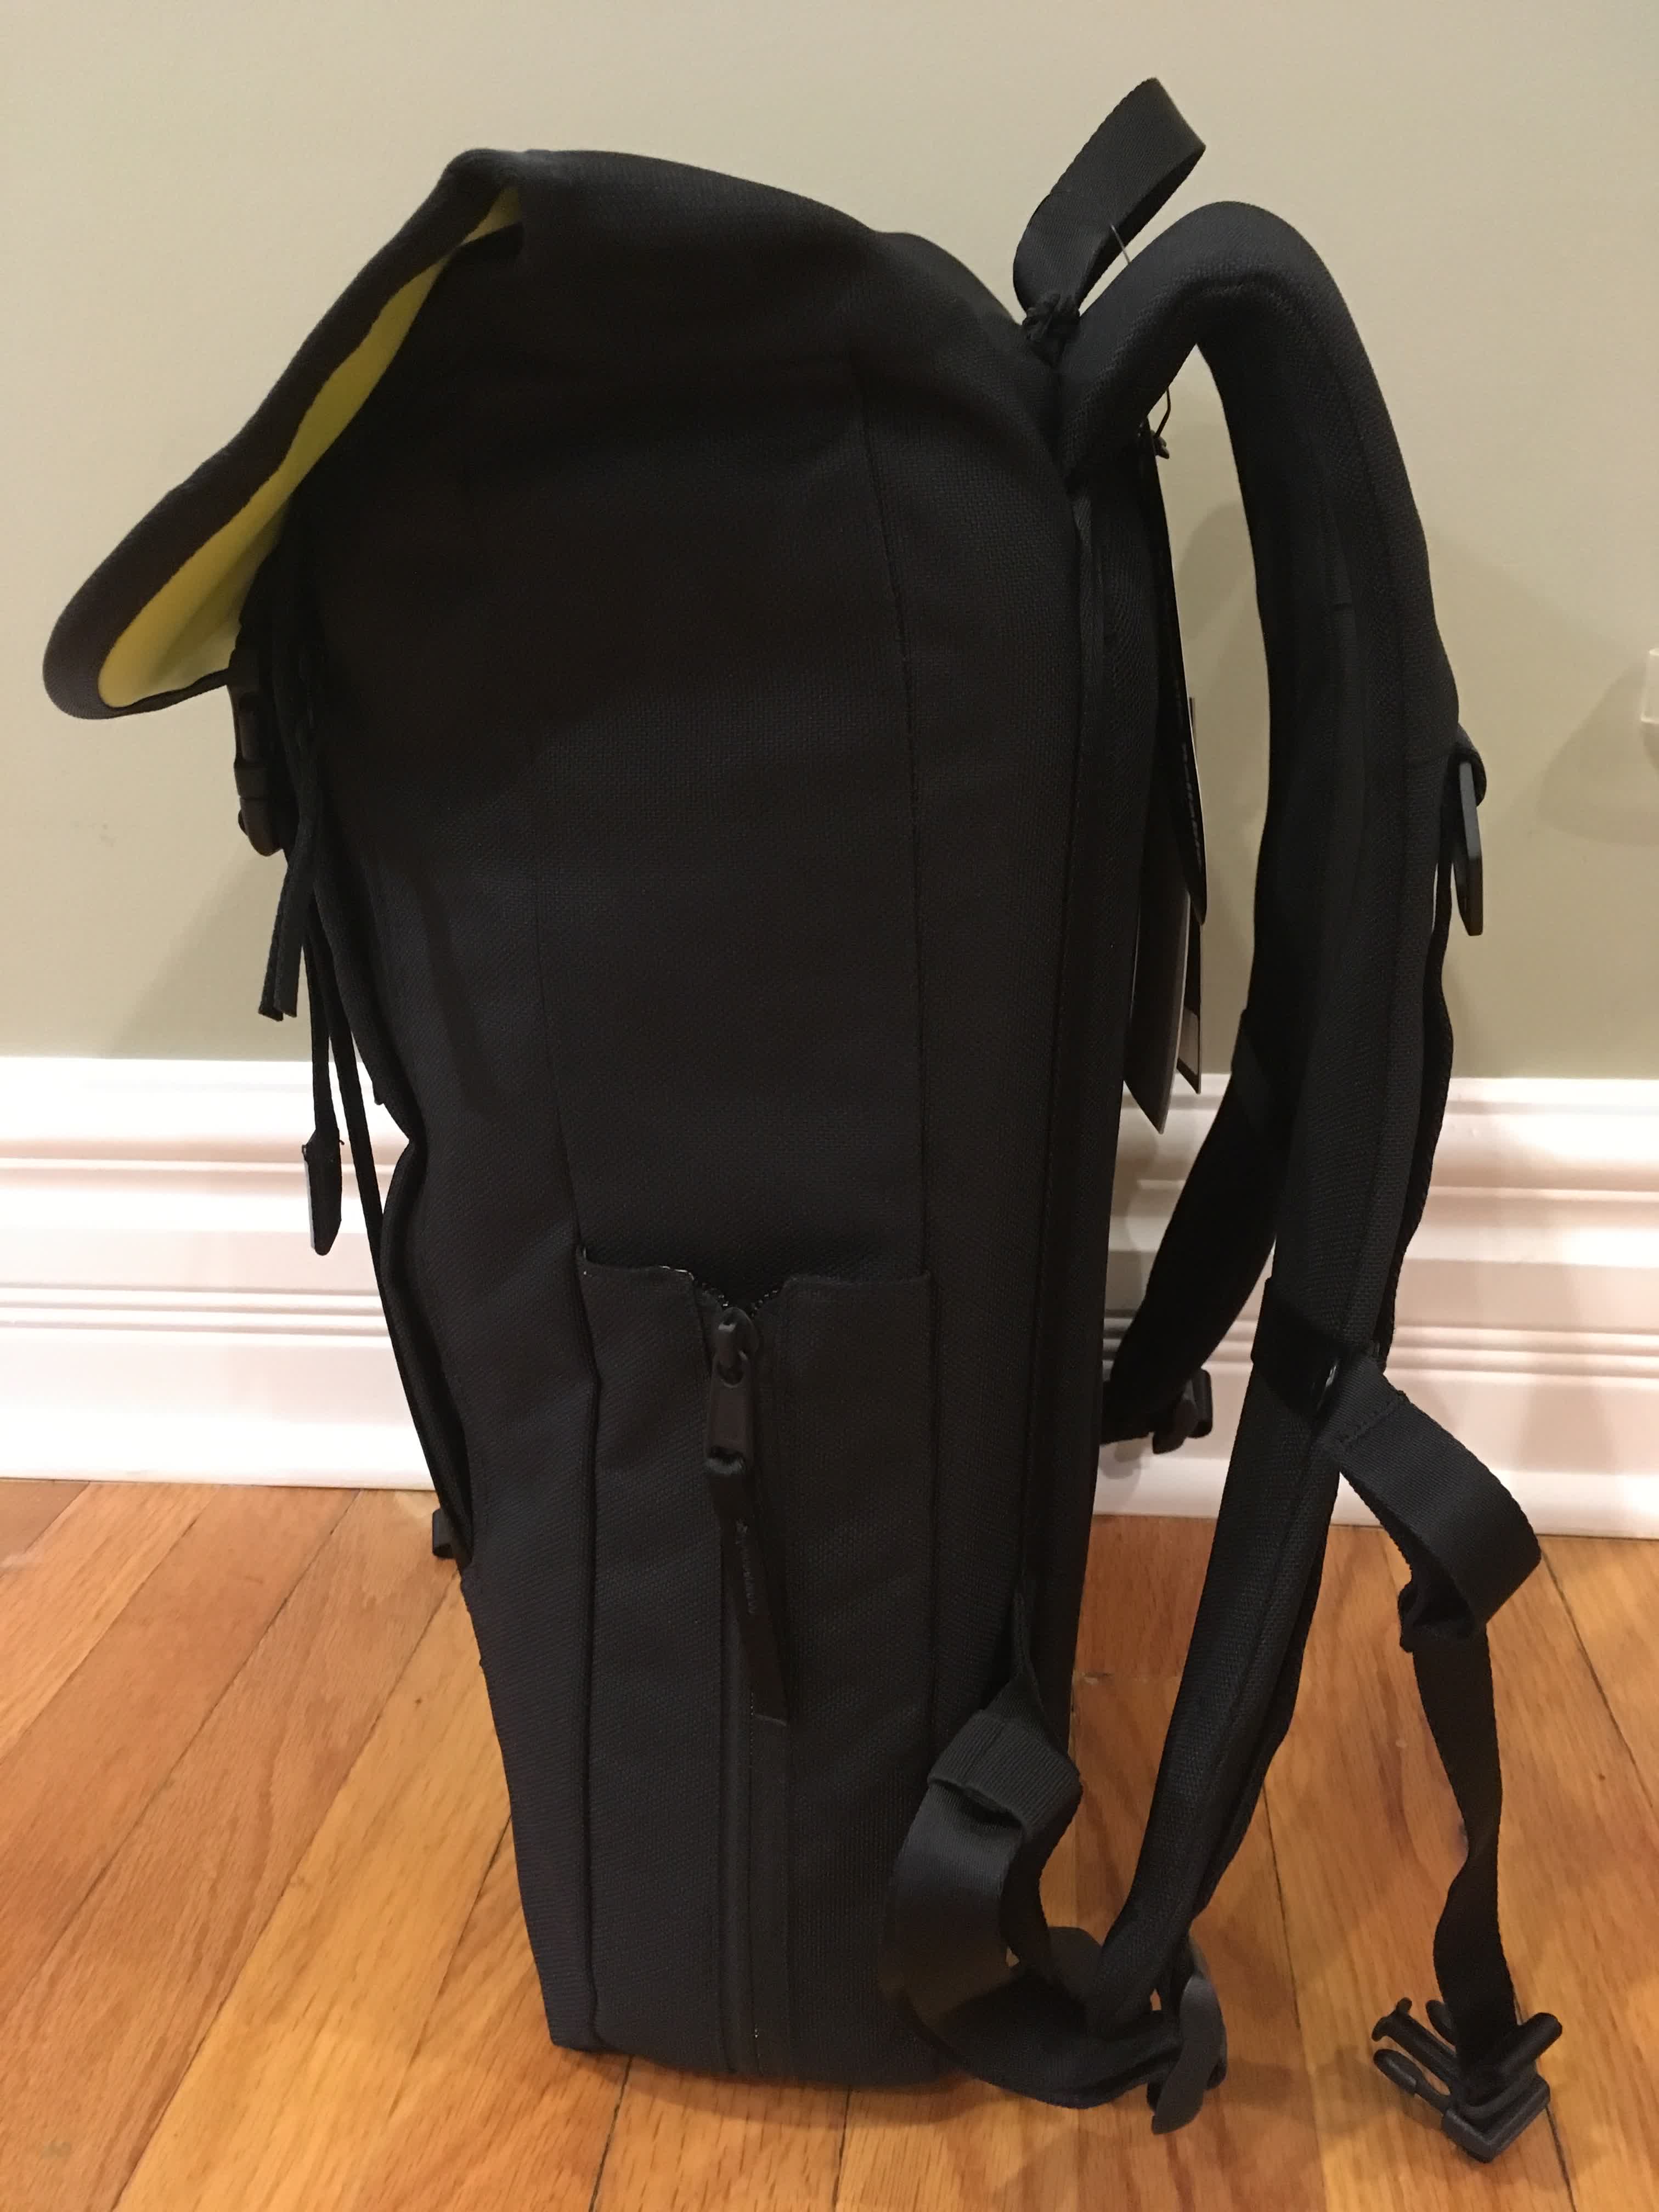 Side view of loaded bag